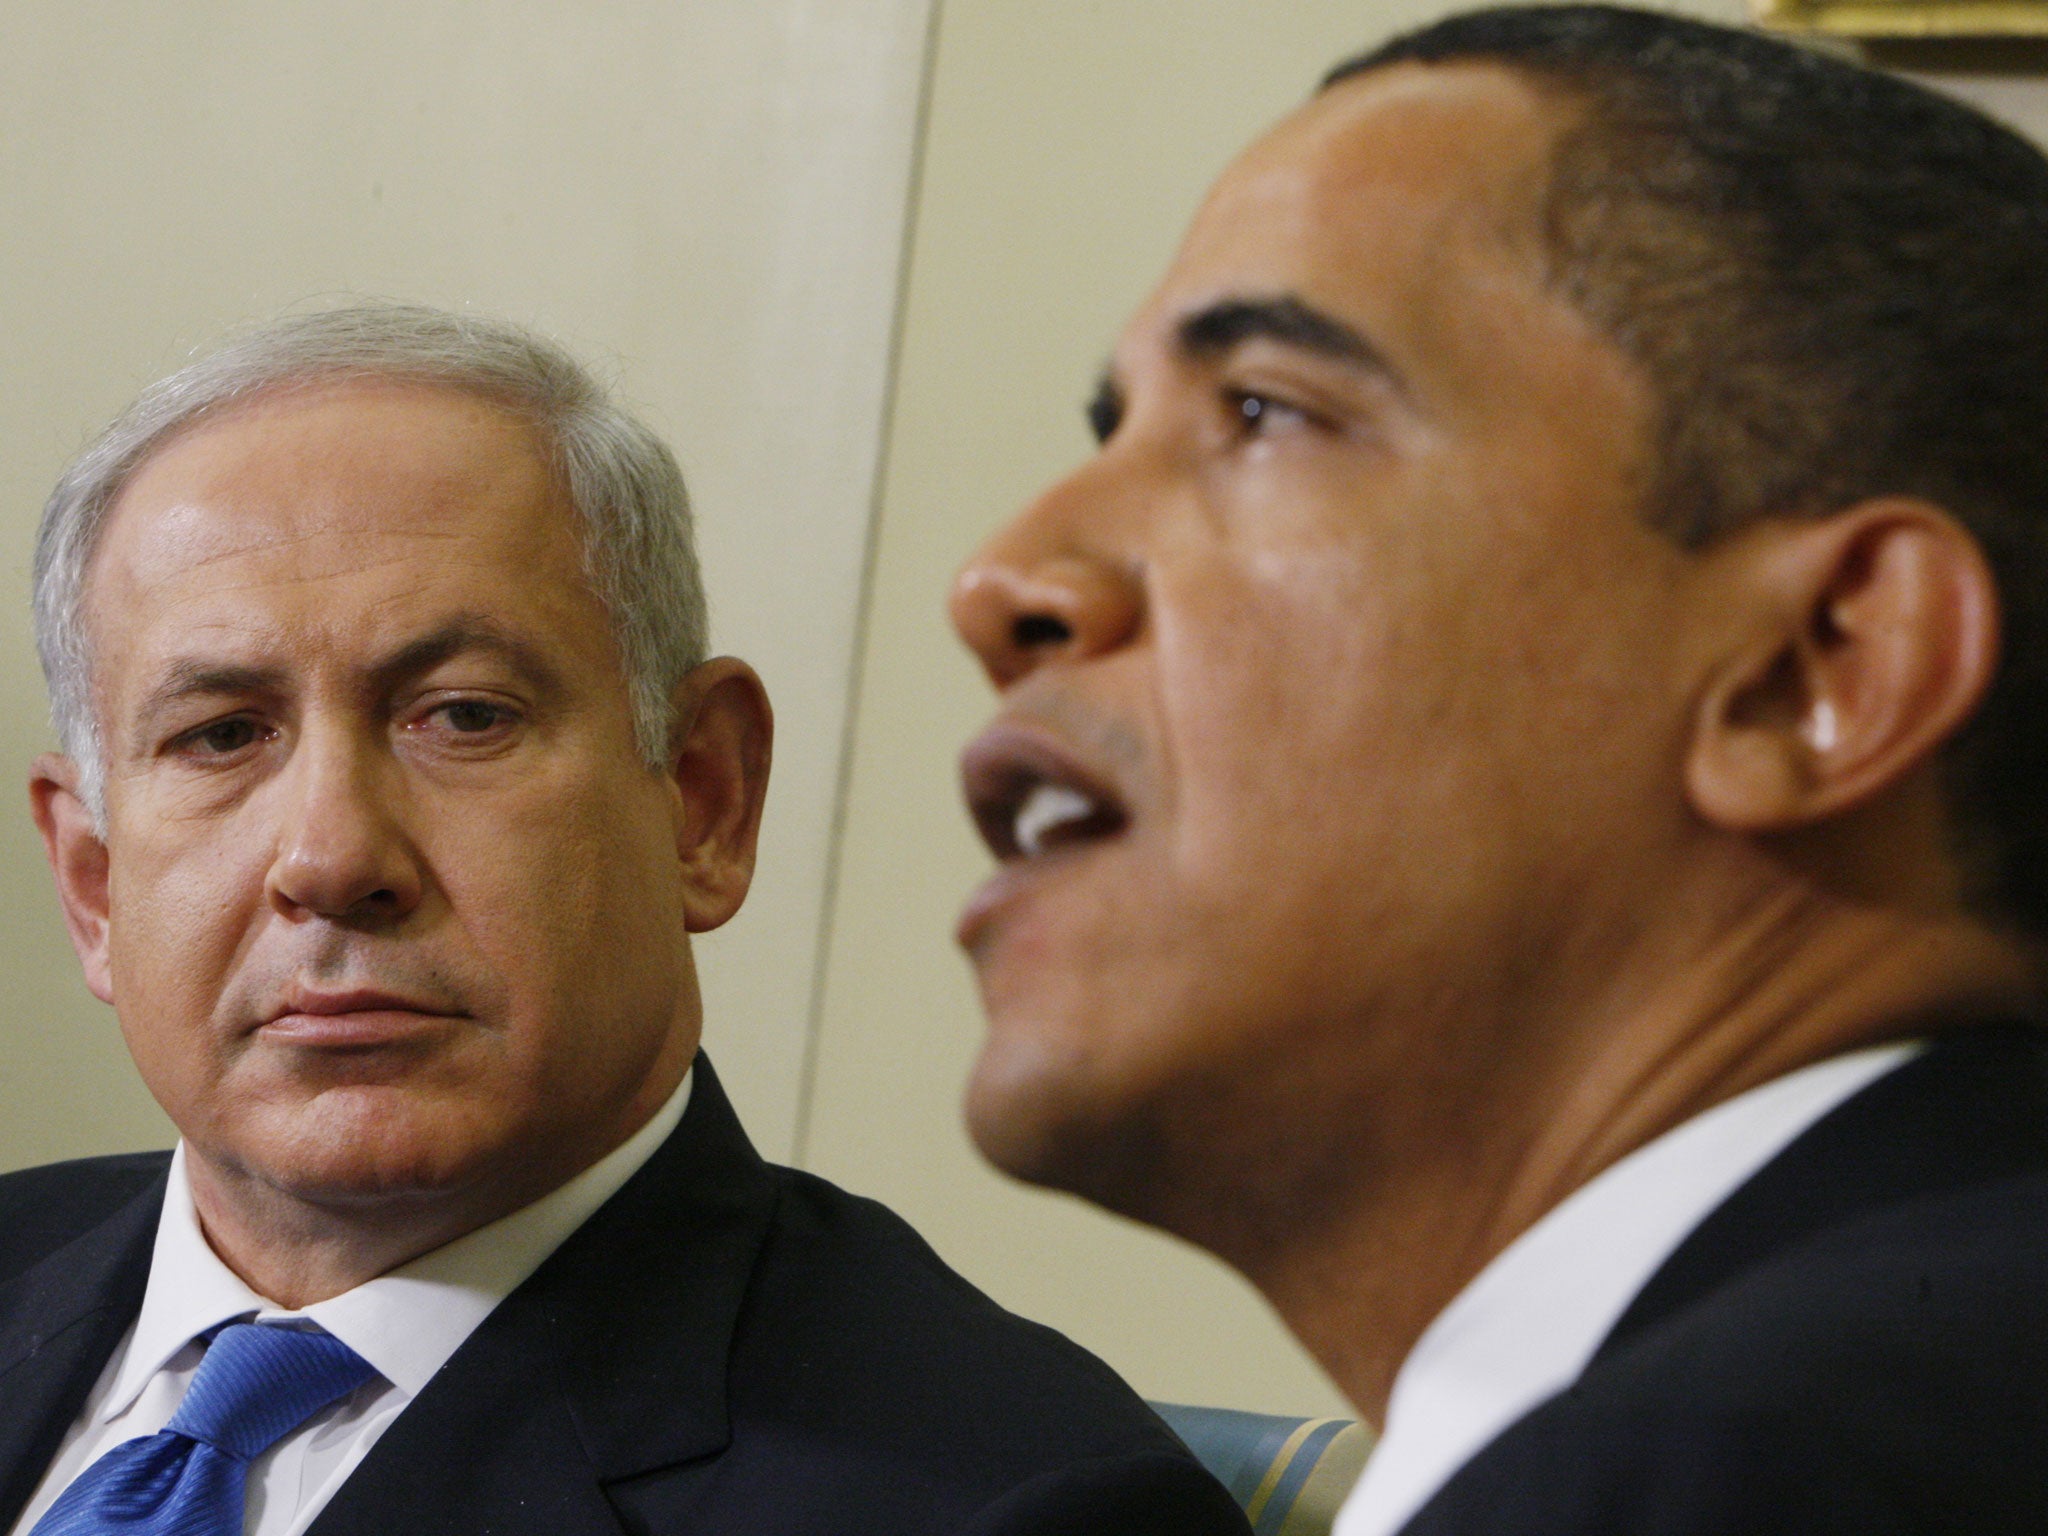 Obama will visit Israel again this week. Previous talks with Benjamin Netanyahu came to nothing